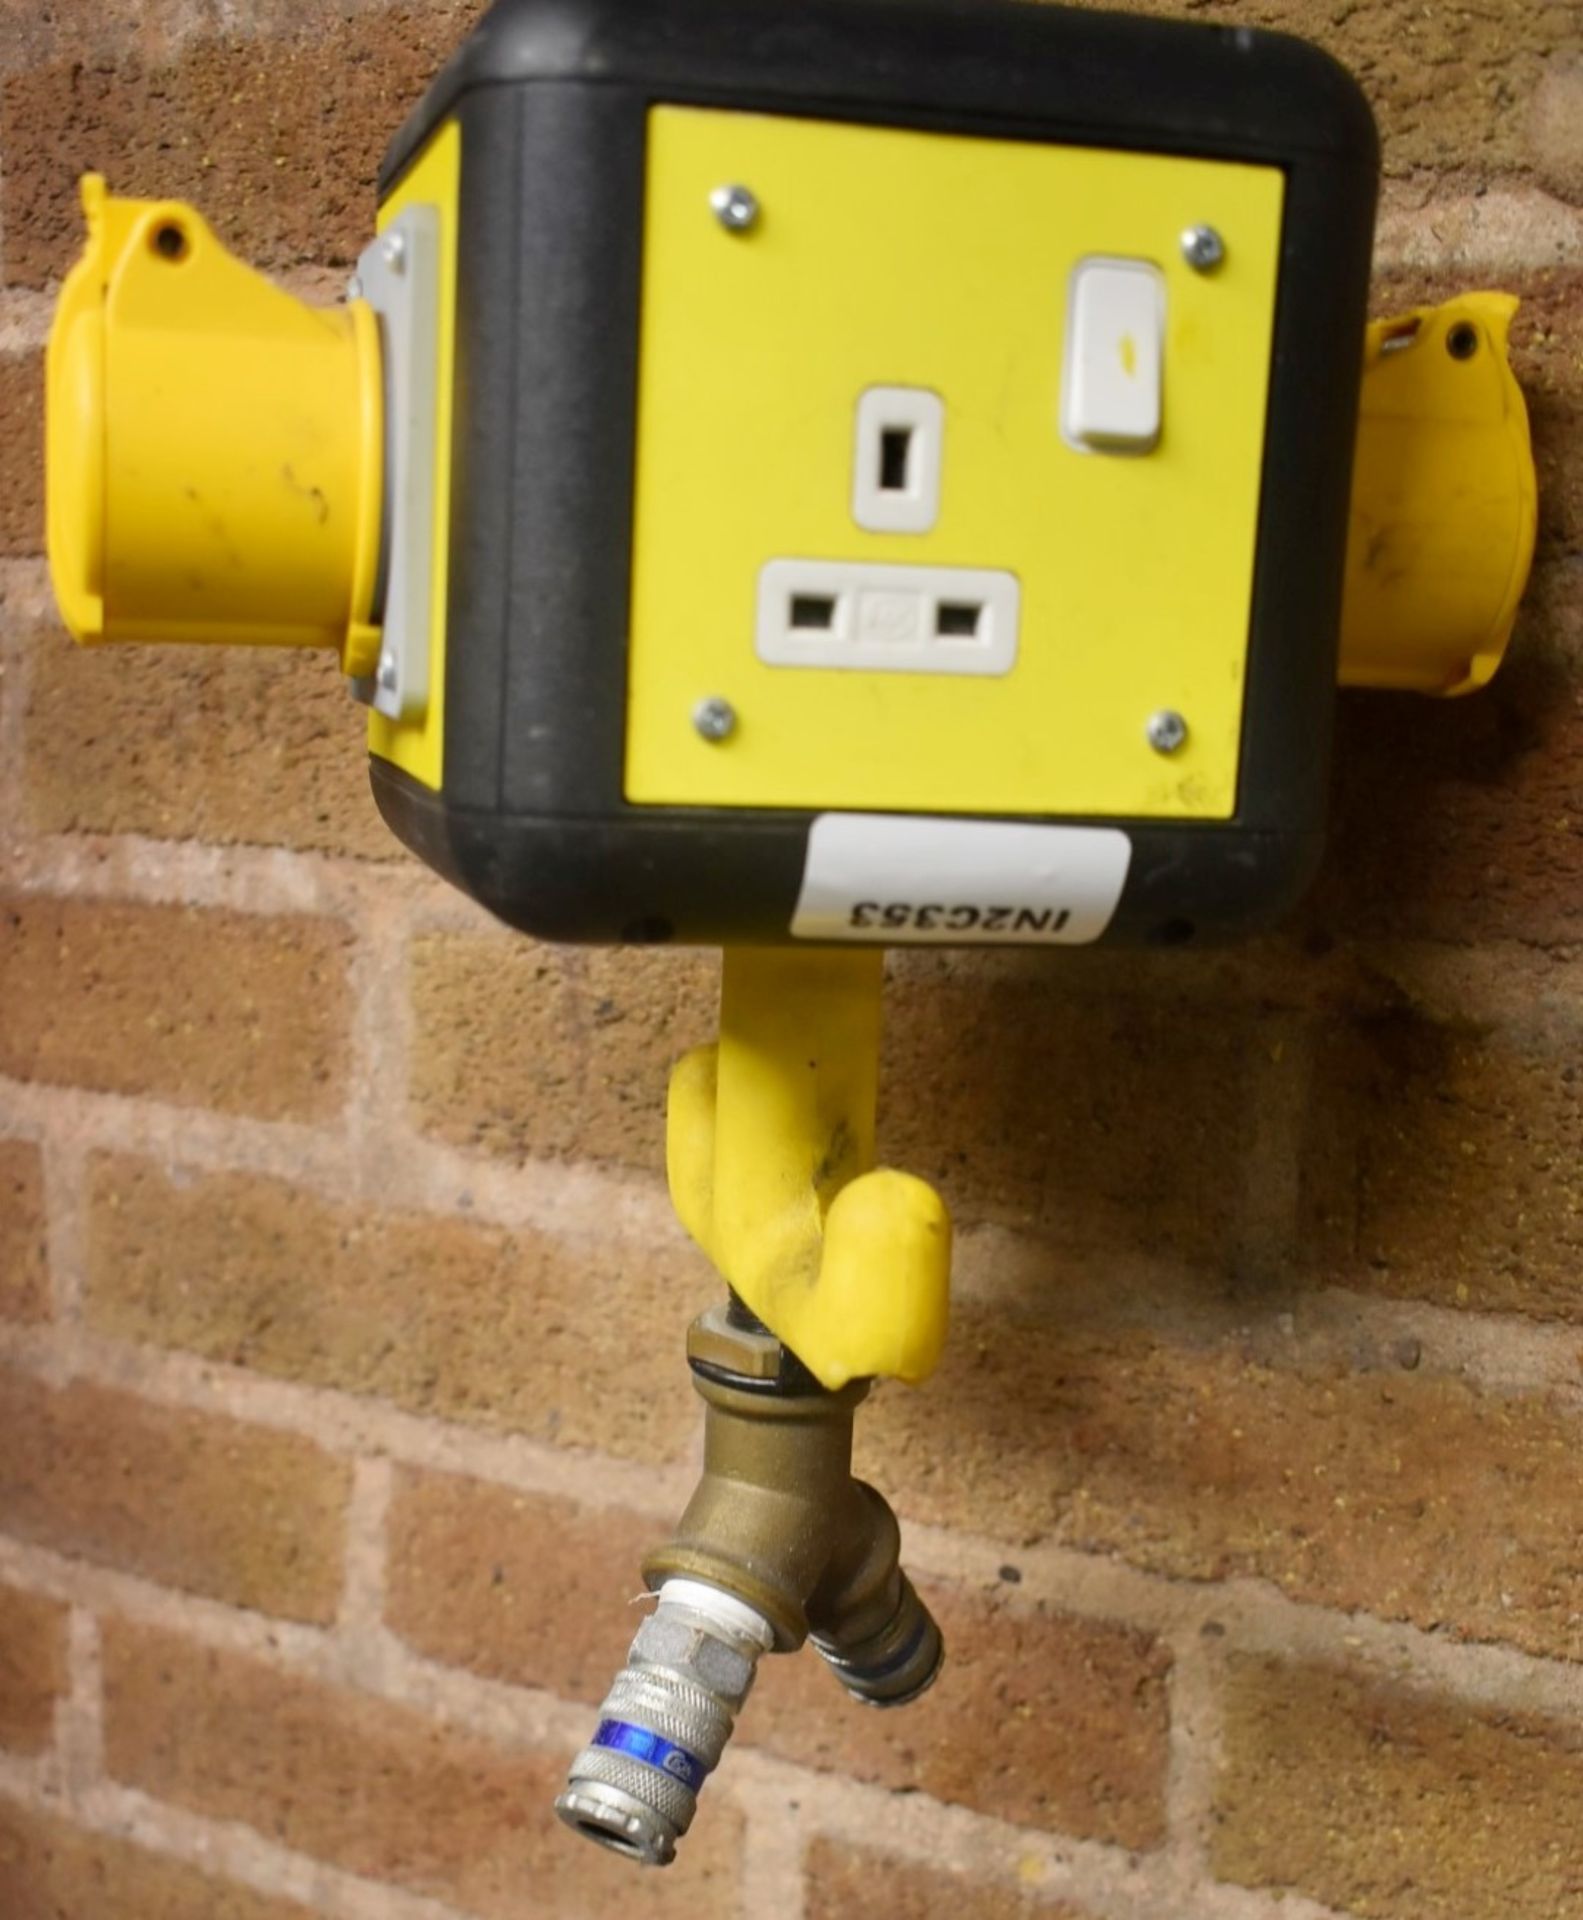 1 x Hovercube Power Socket with Compressed Air Connection - Ref: C353 - CL816 - Location: Birmingham